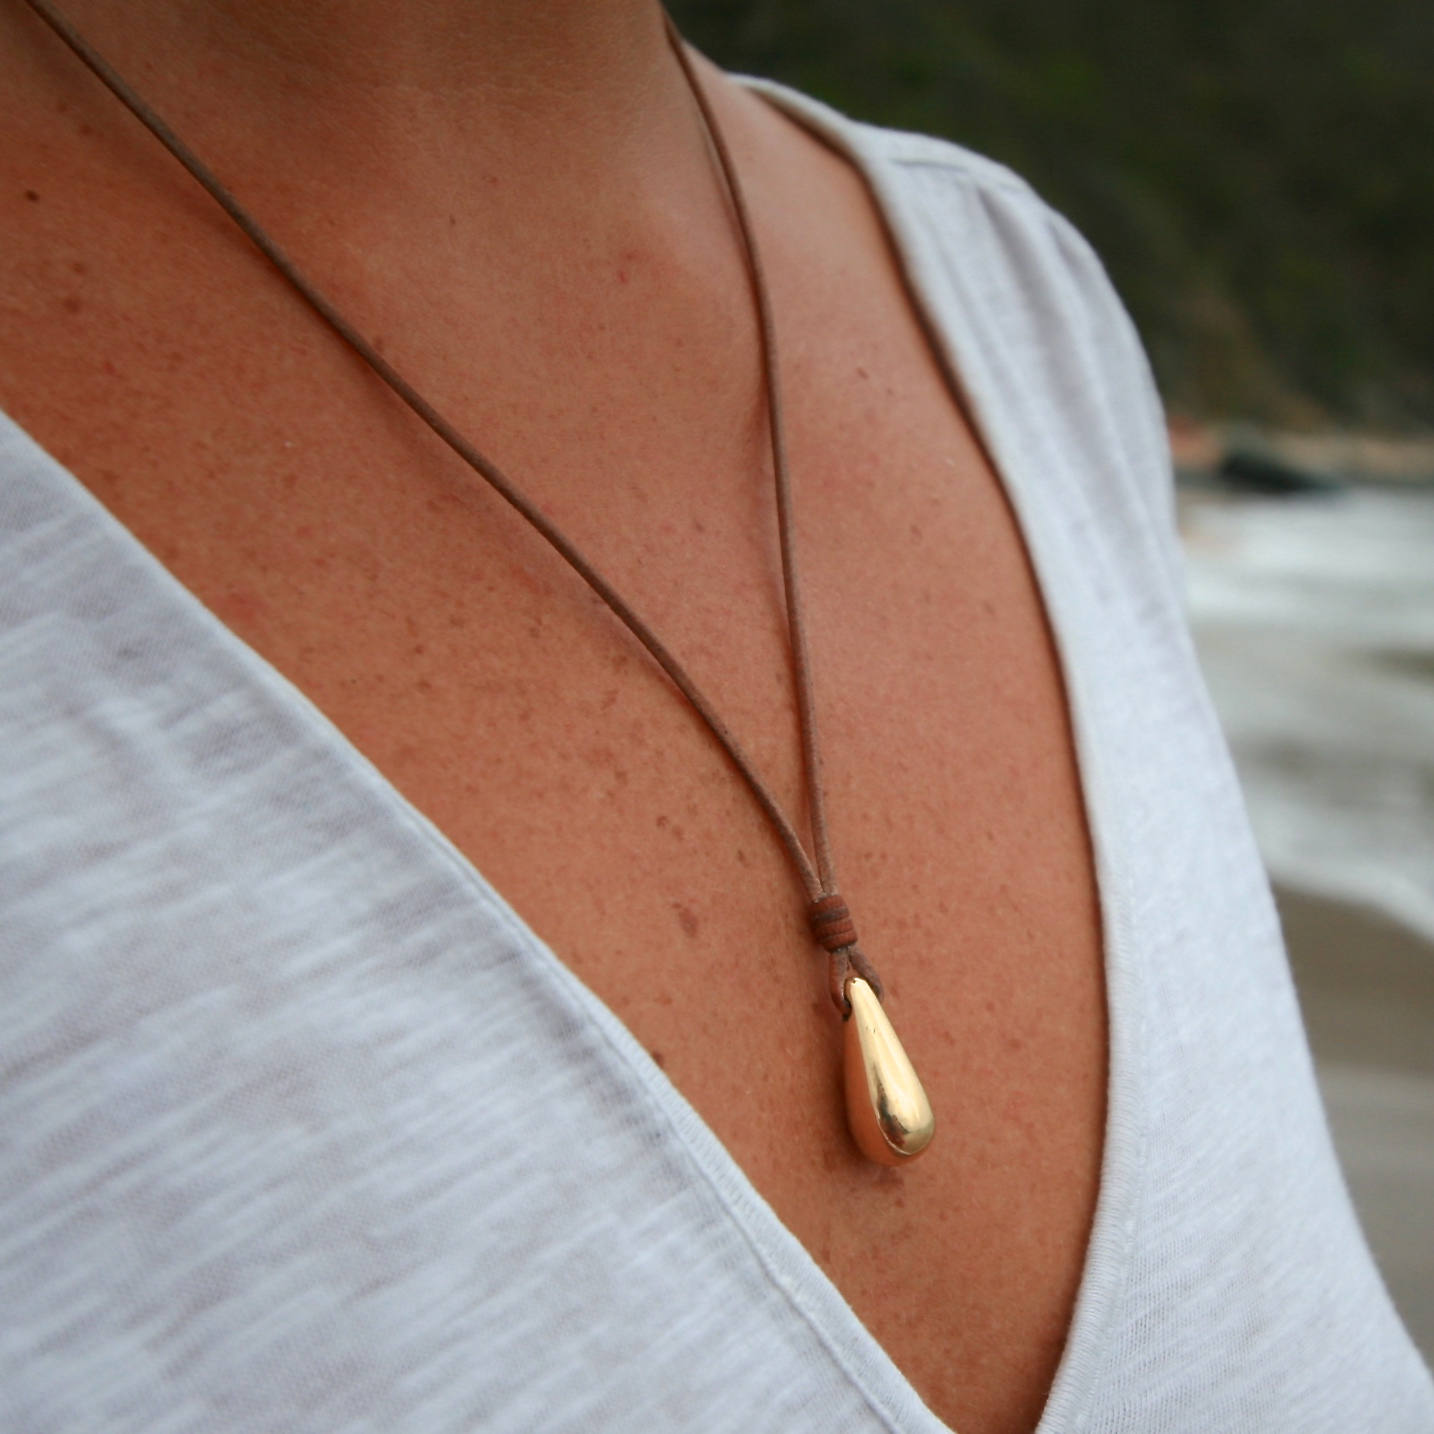 Handmade 18k gold drop strung on leather with Tahitian cultured pearls, boho beach jewelry, leather jewelry, St Barth signature, gold love